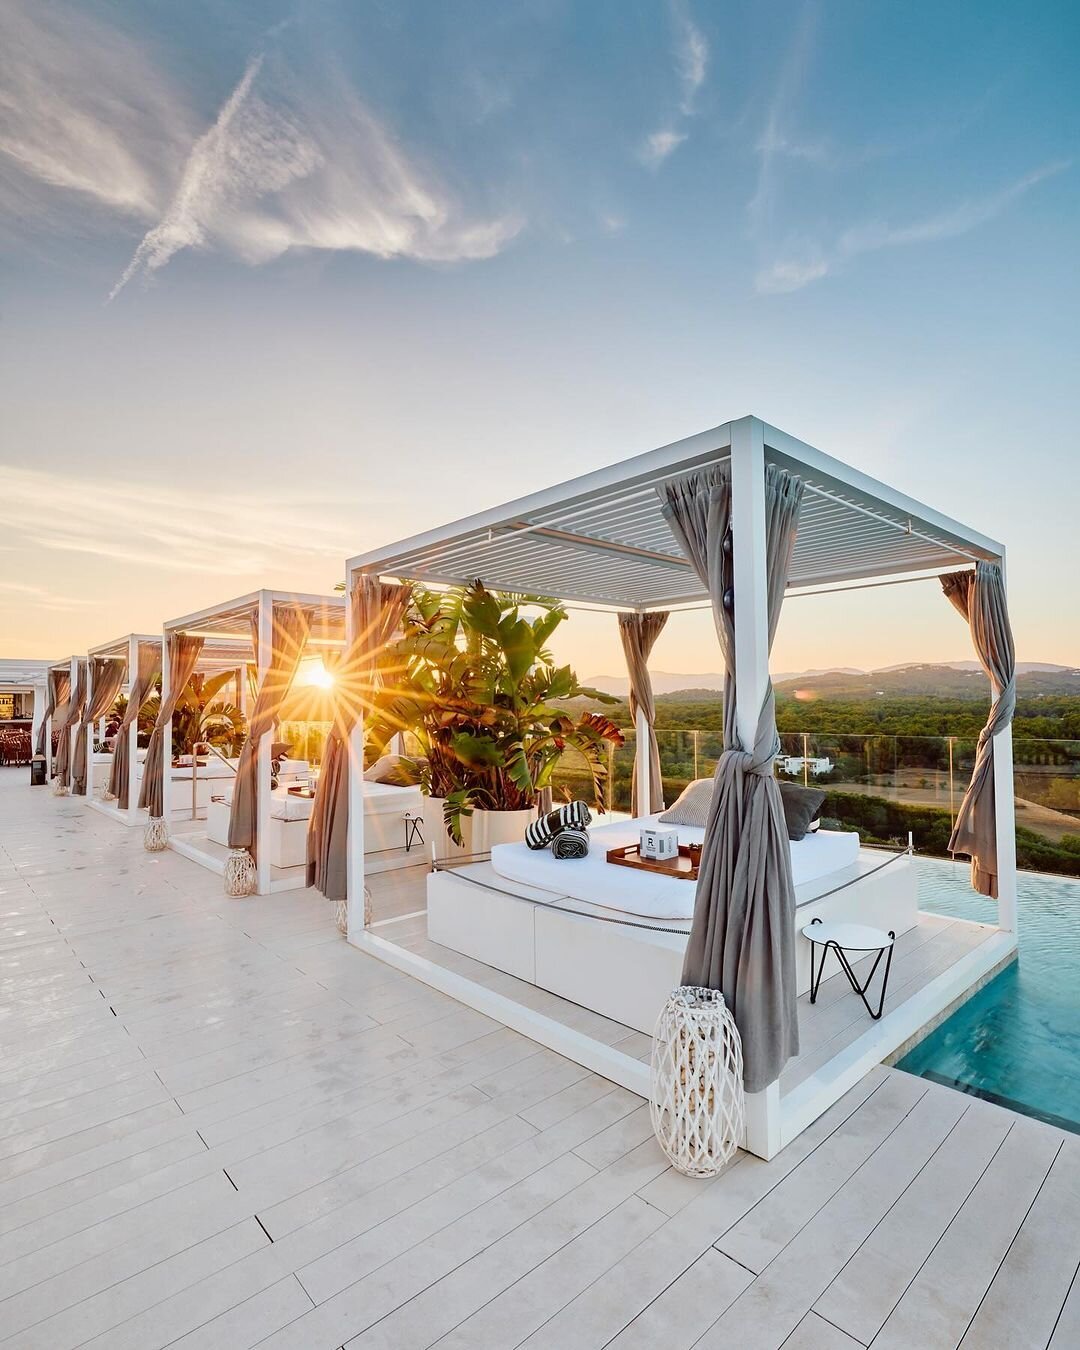 #AprilFool'sDay may be here, but there's no kidding around when it comes to the breathtaking sunsets at @BLESS Hotel Ibiza.